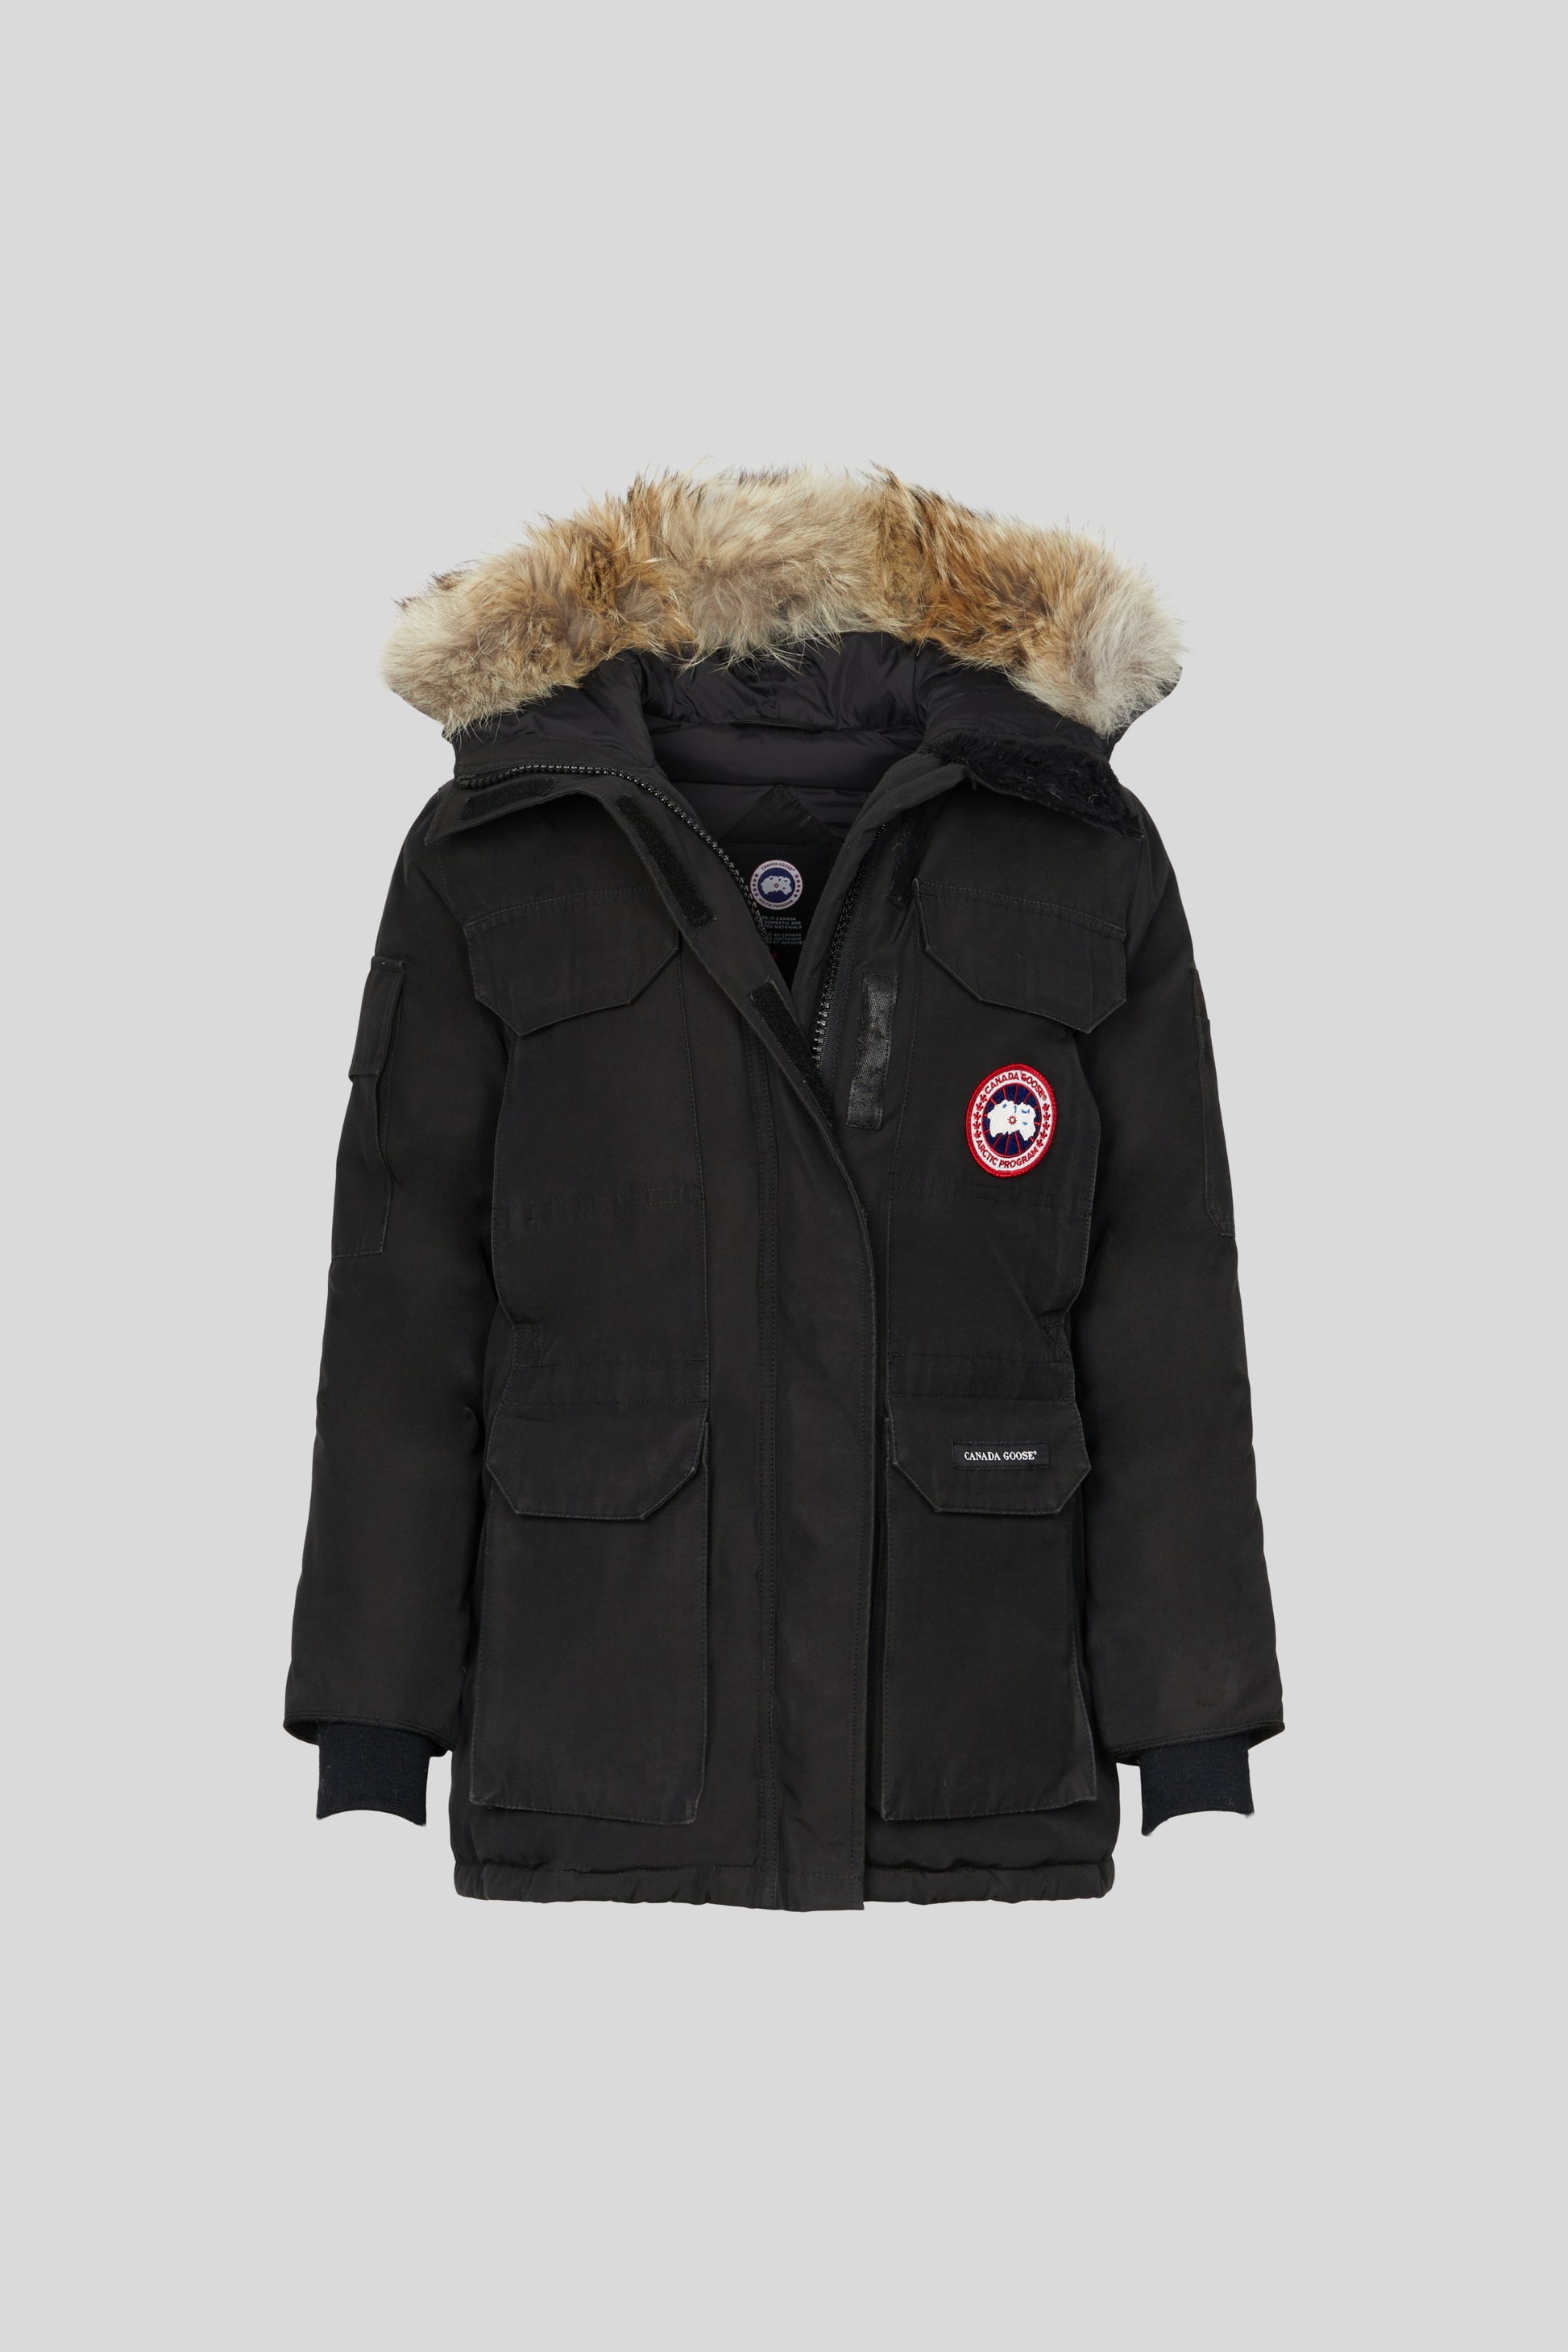 Women's Expedition Parka Fusion Fit